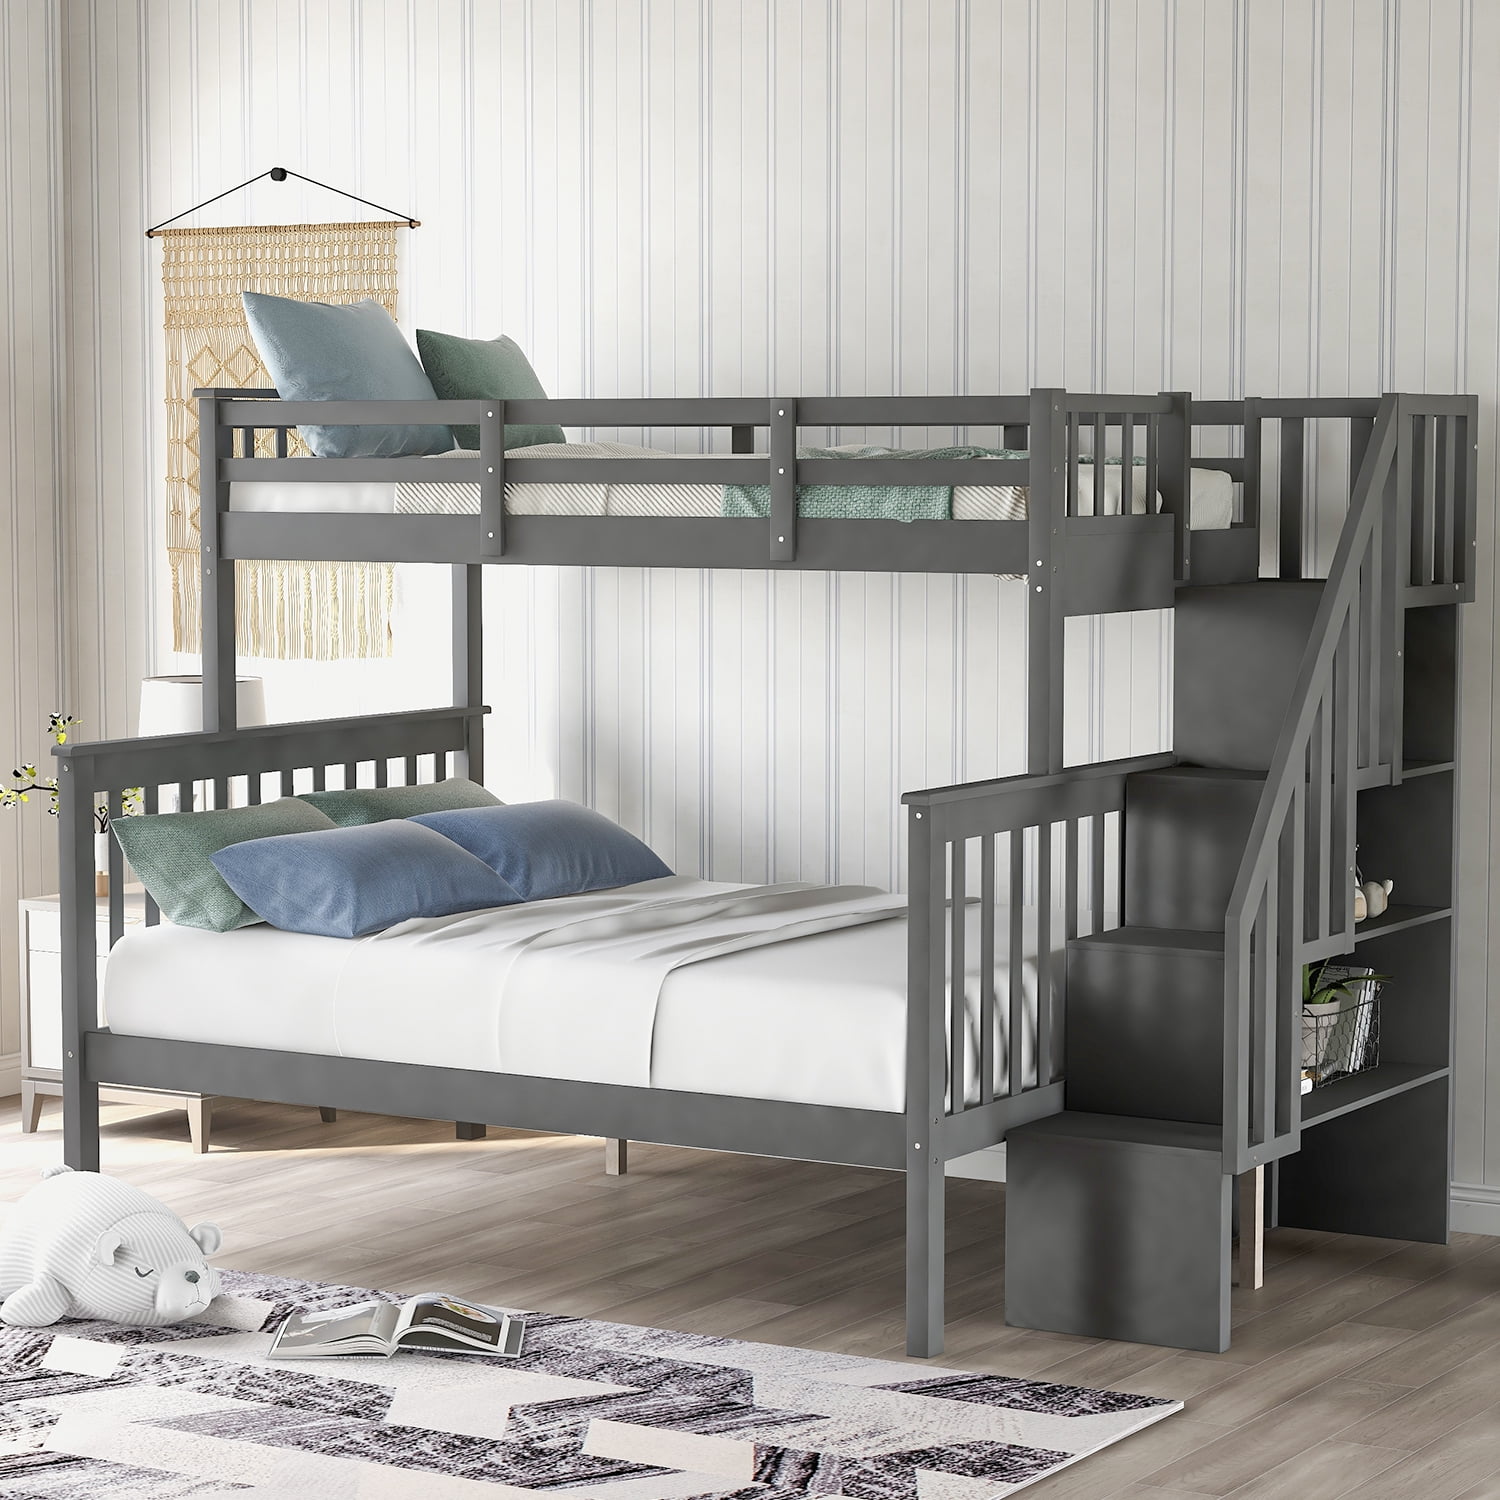 Twin Over Full Bunk Bed Frame Hardwood, Heavy Duty Bunk Beds Twin Over Full